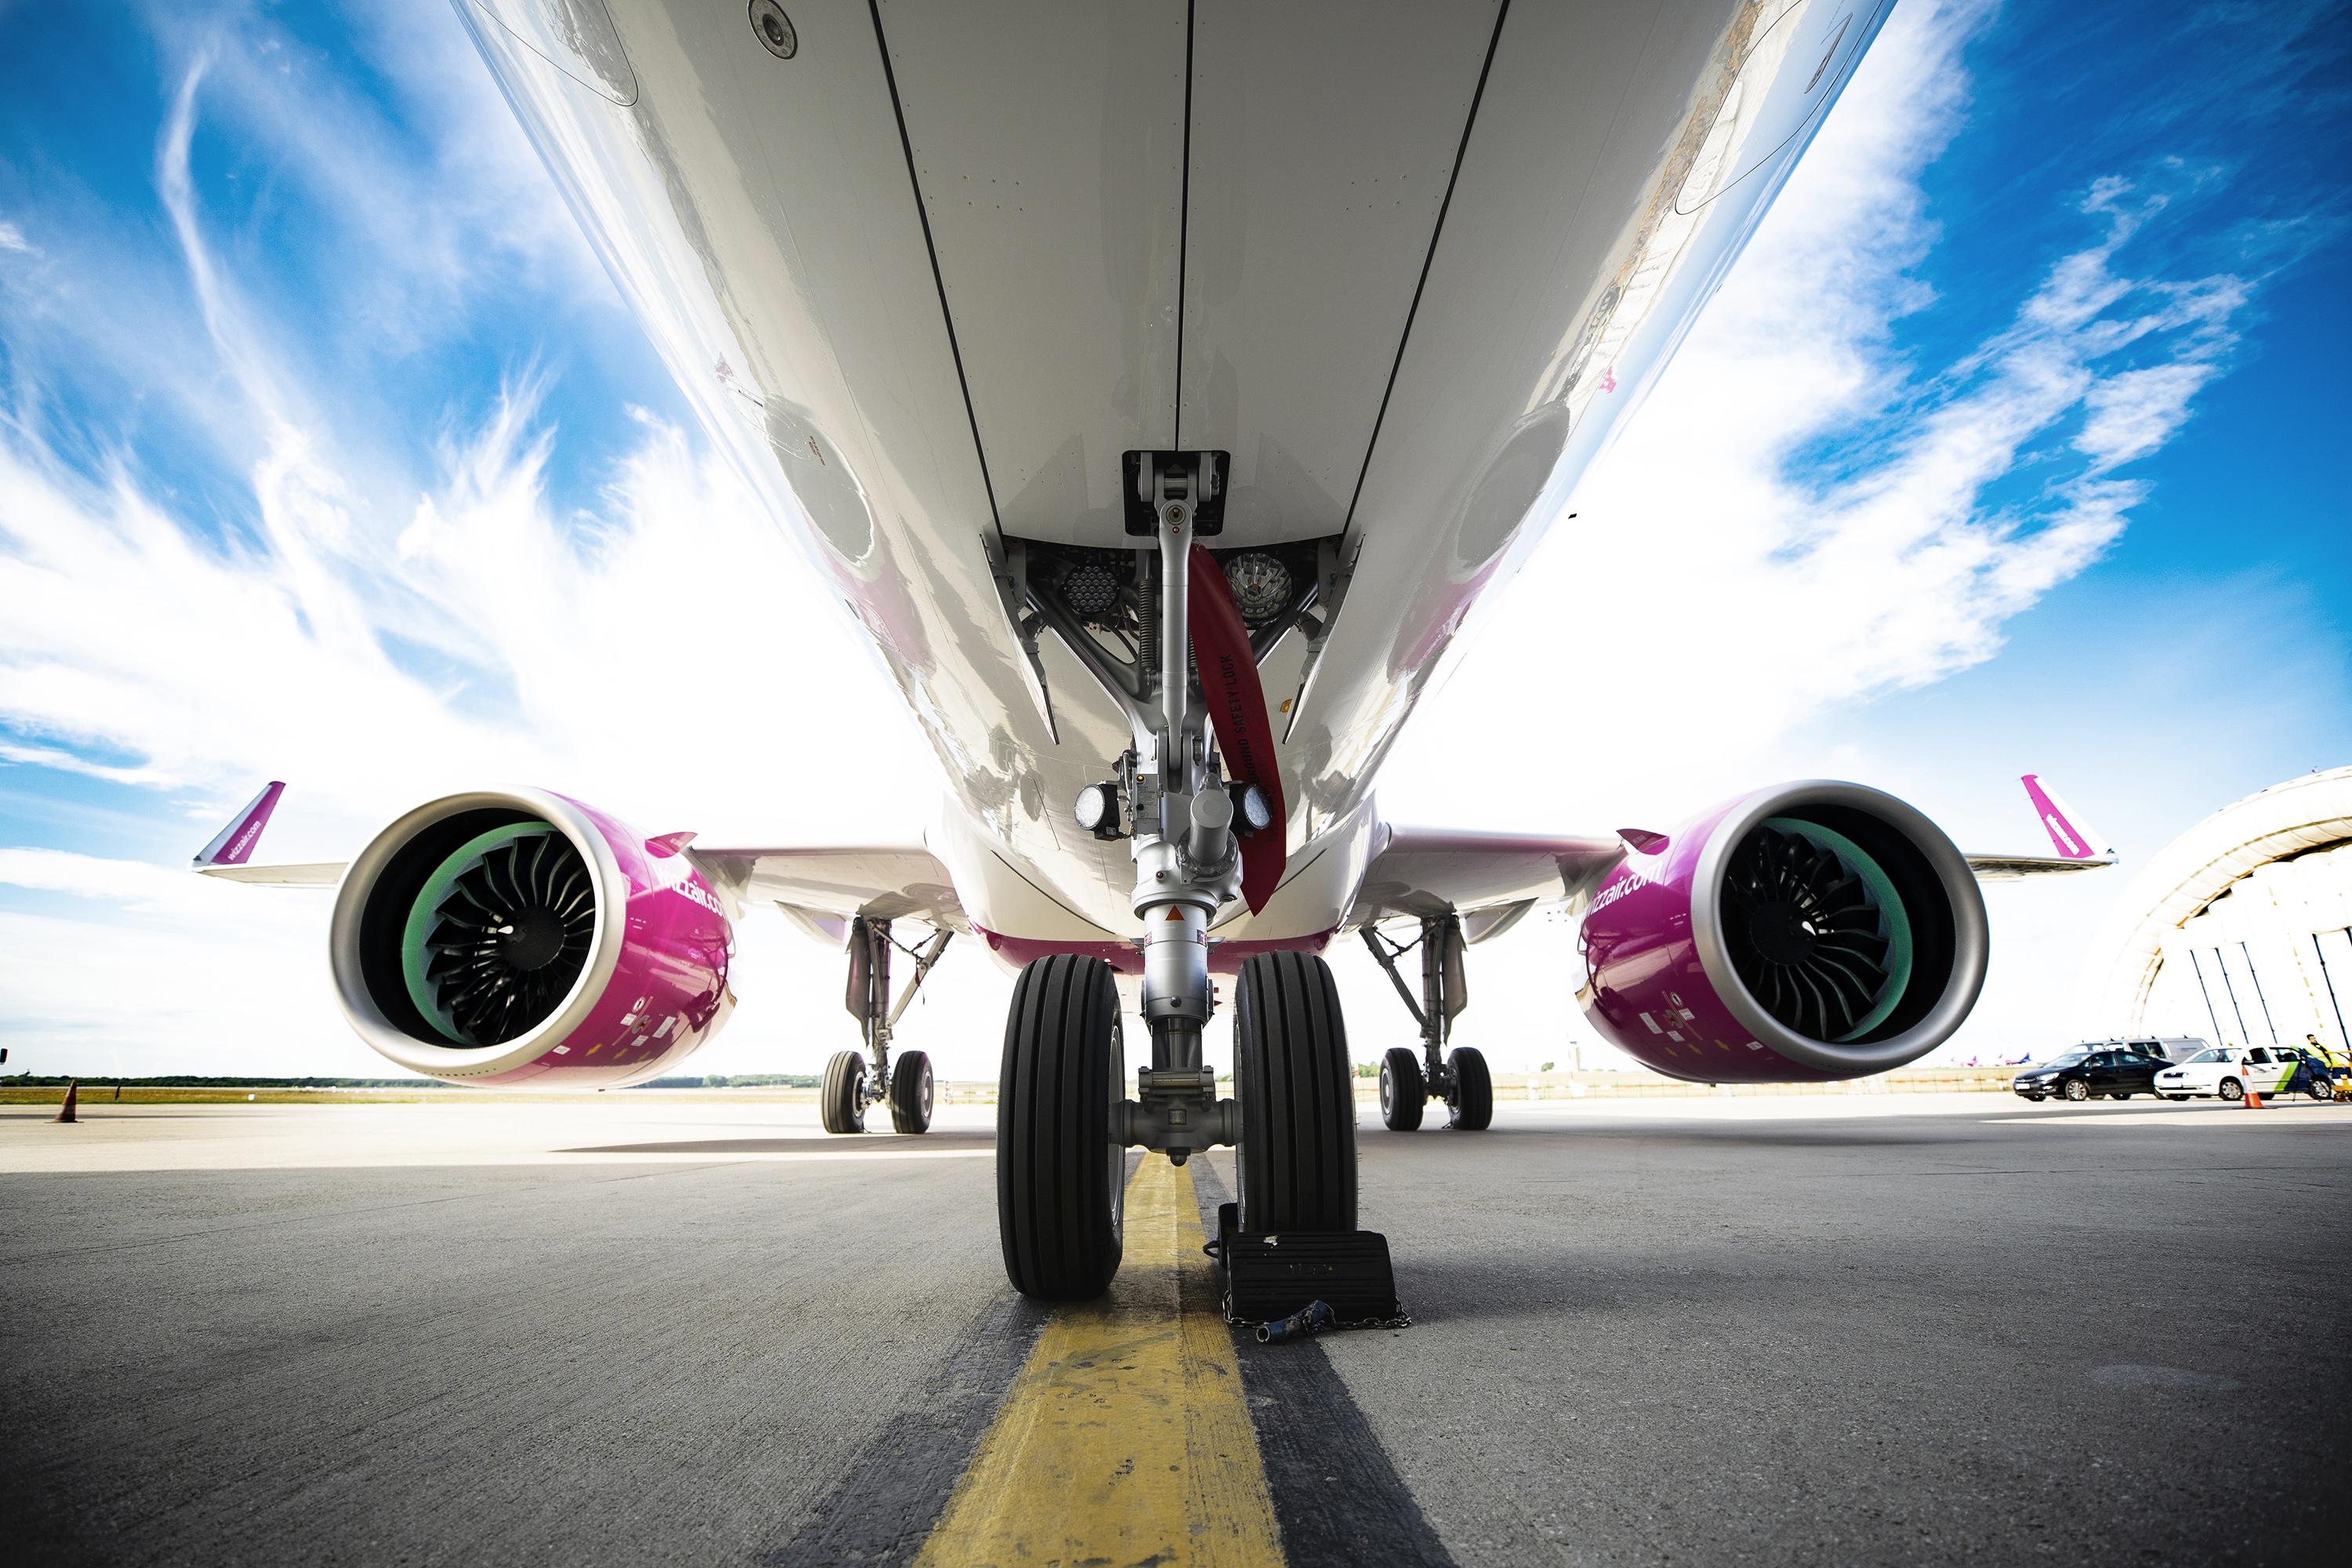 Wizz Air and Airbus sign an agreement on hydrogen powered aircraft operations